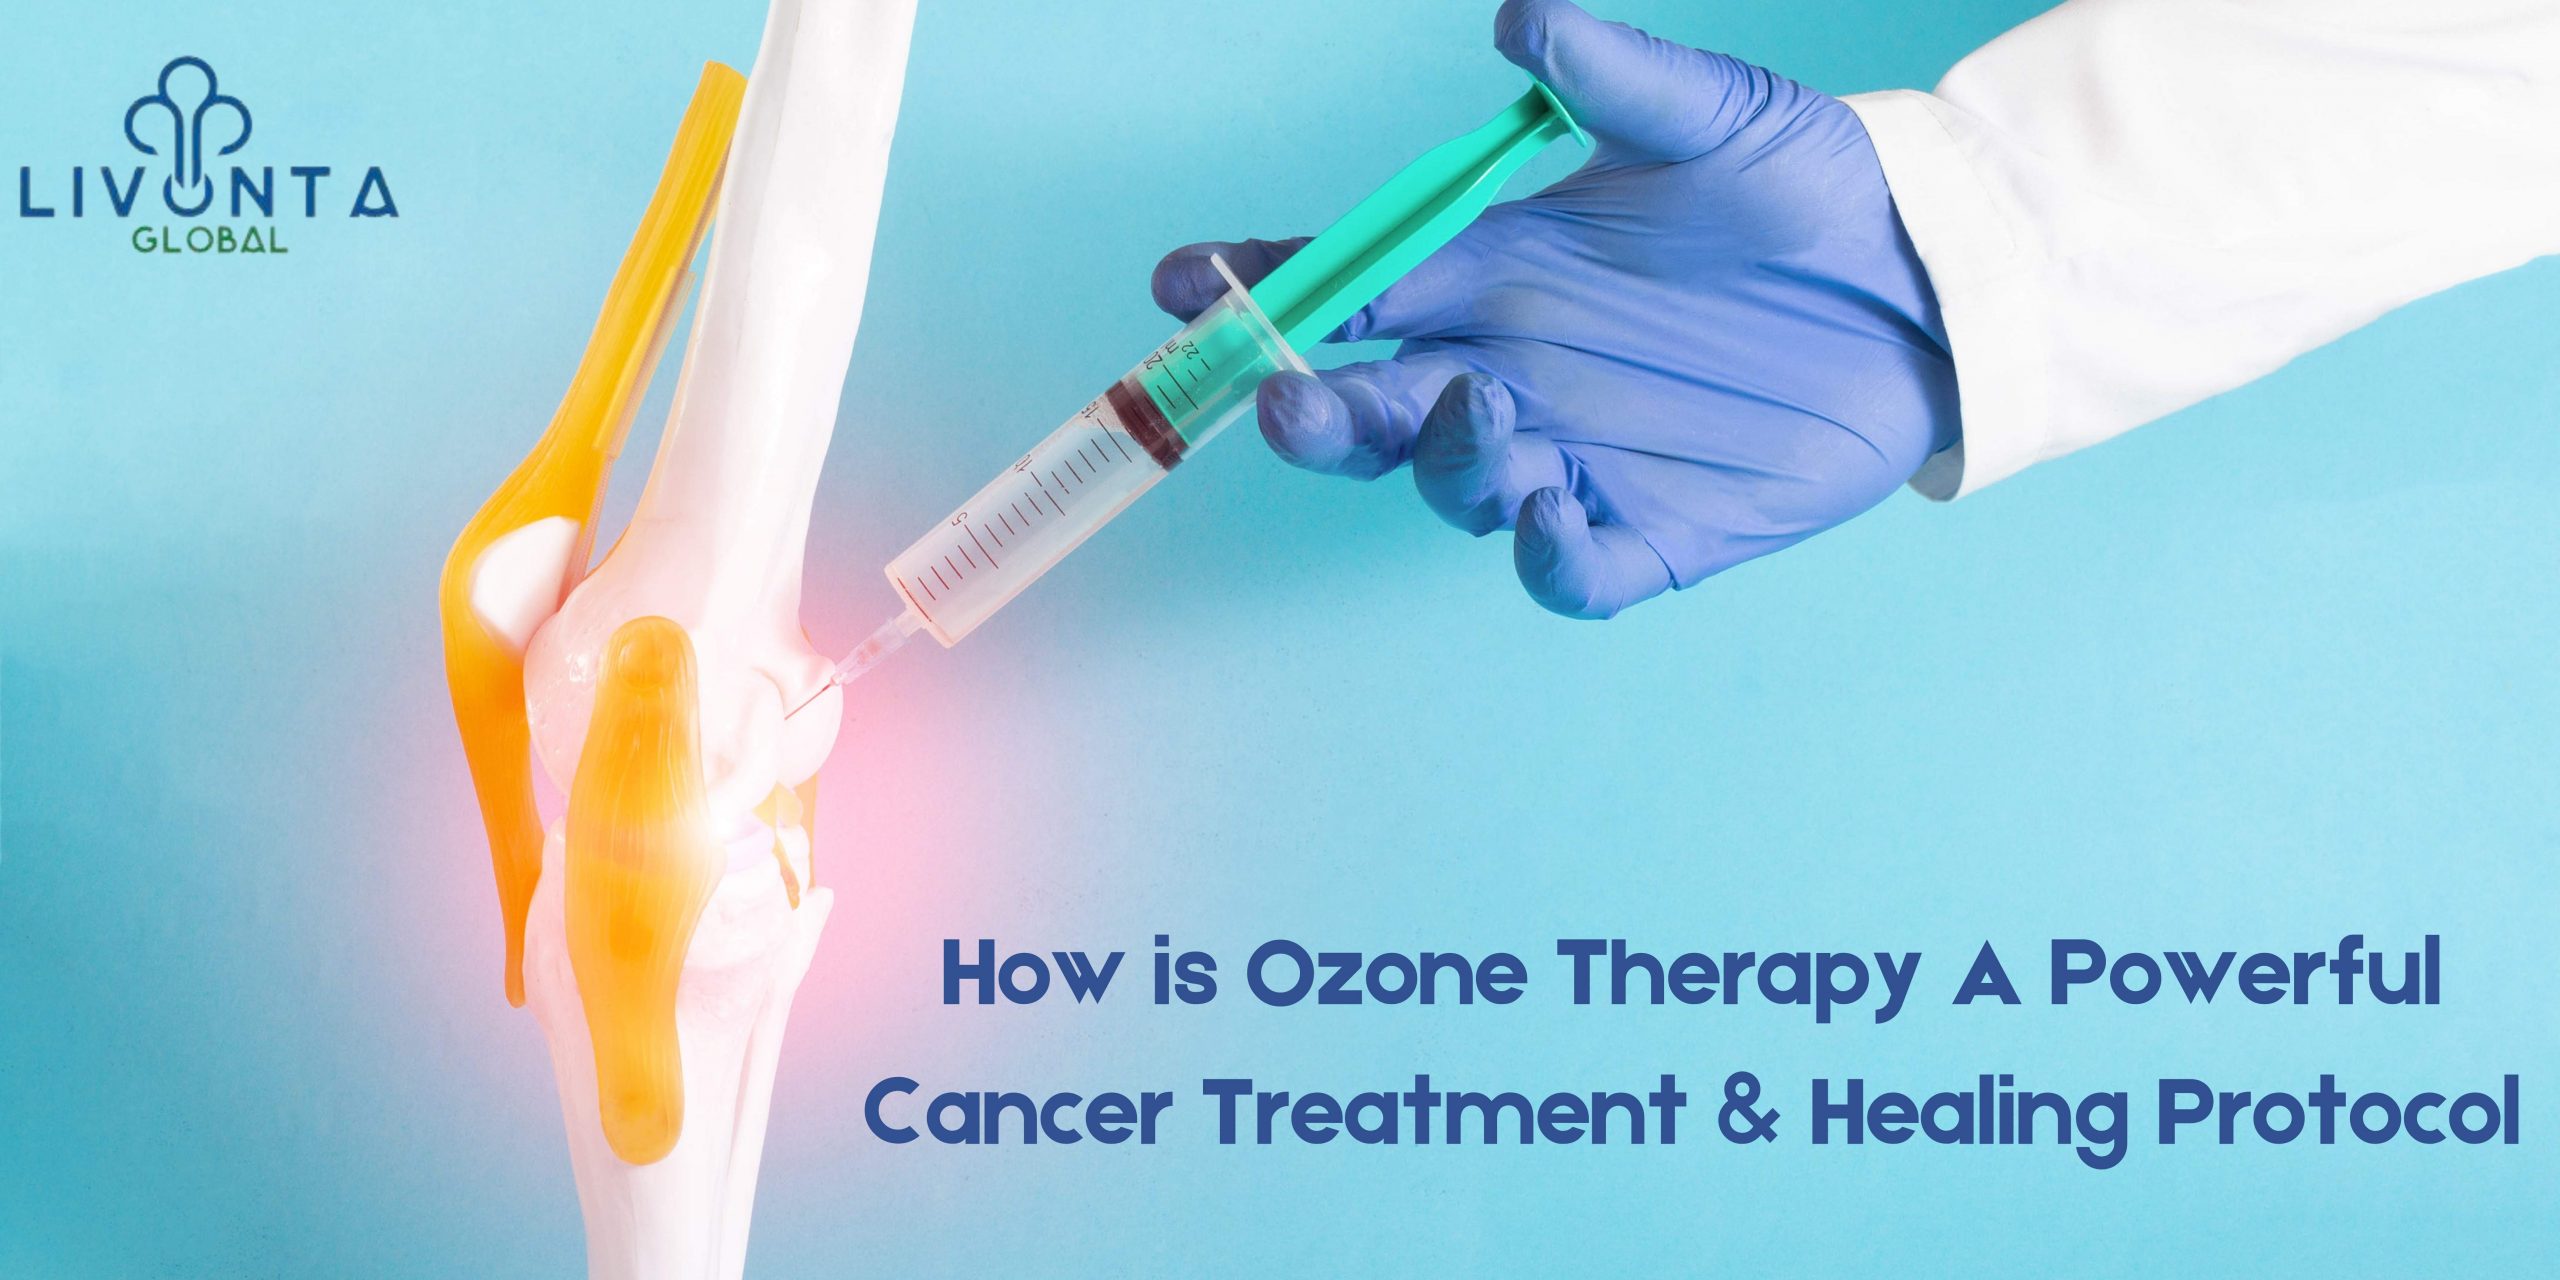 How is Ozone Therapy A Powerful Cancer Treatment & Healing Protocol